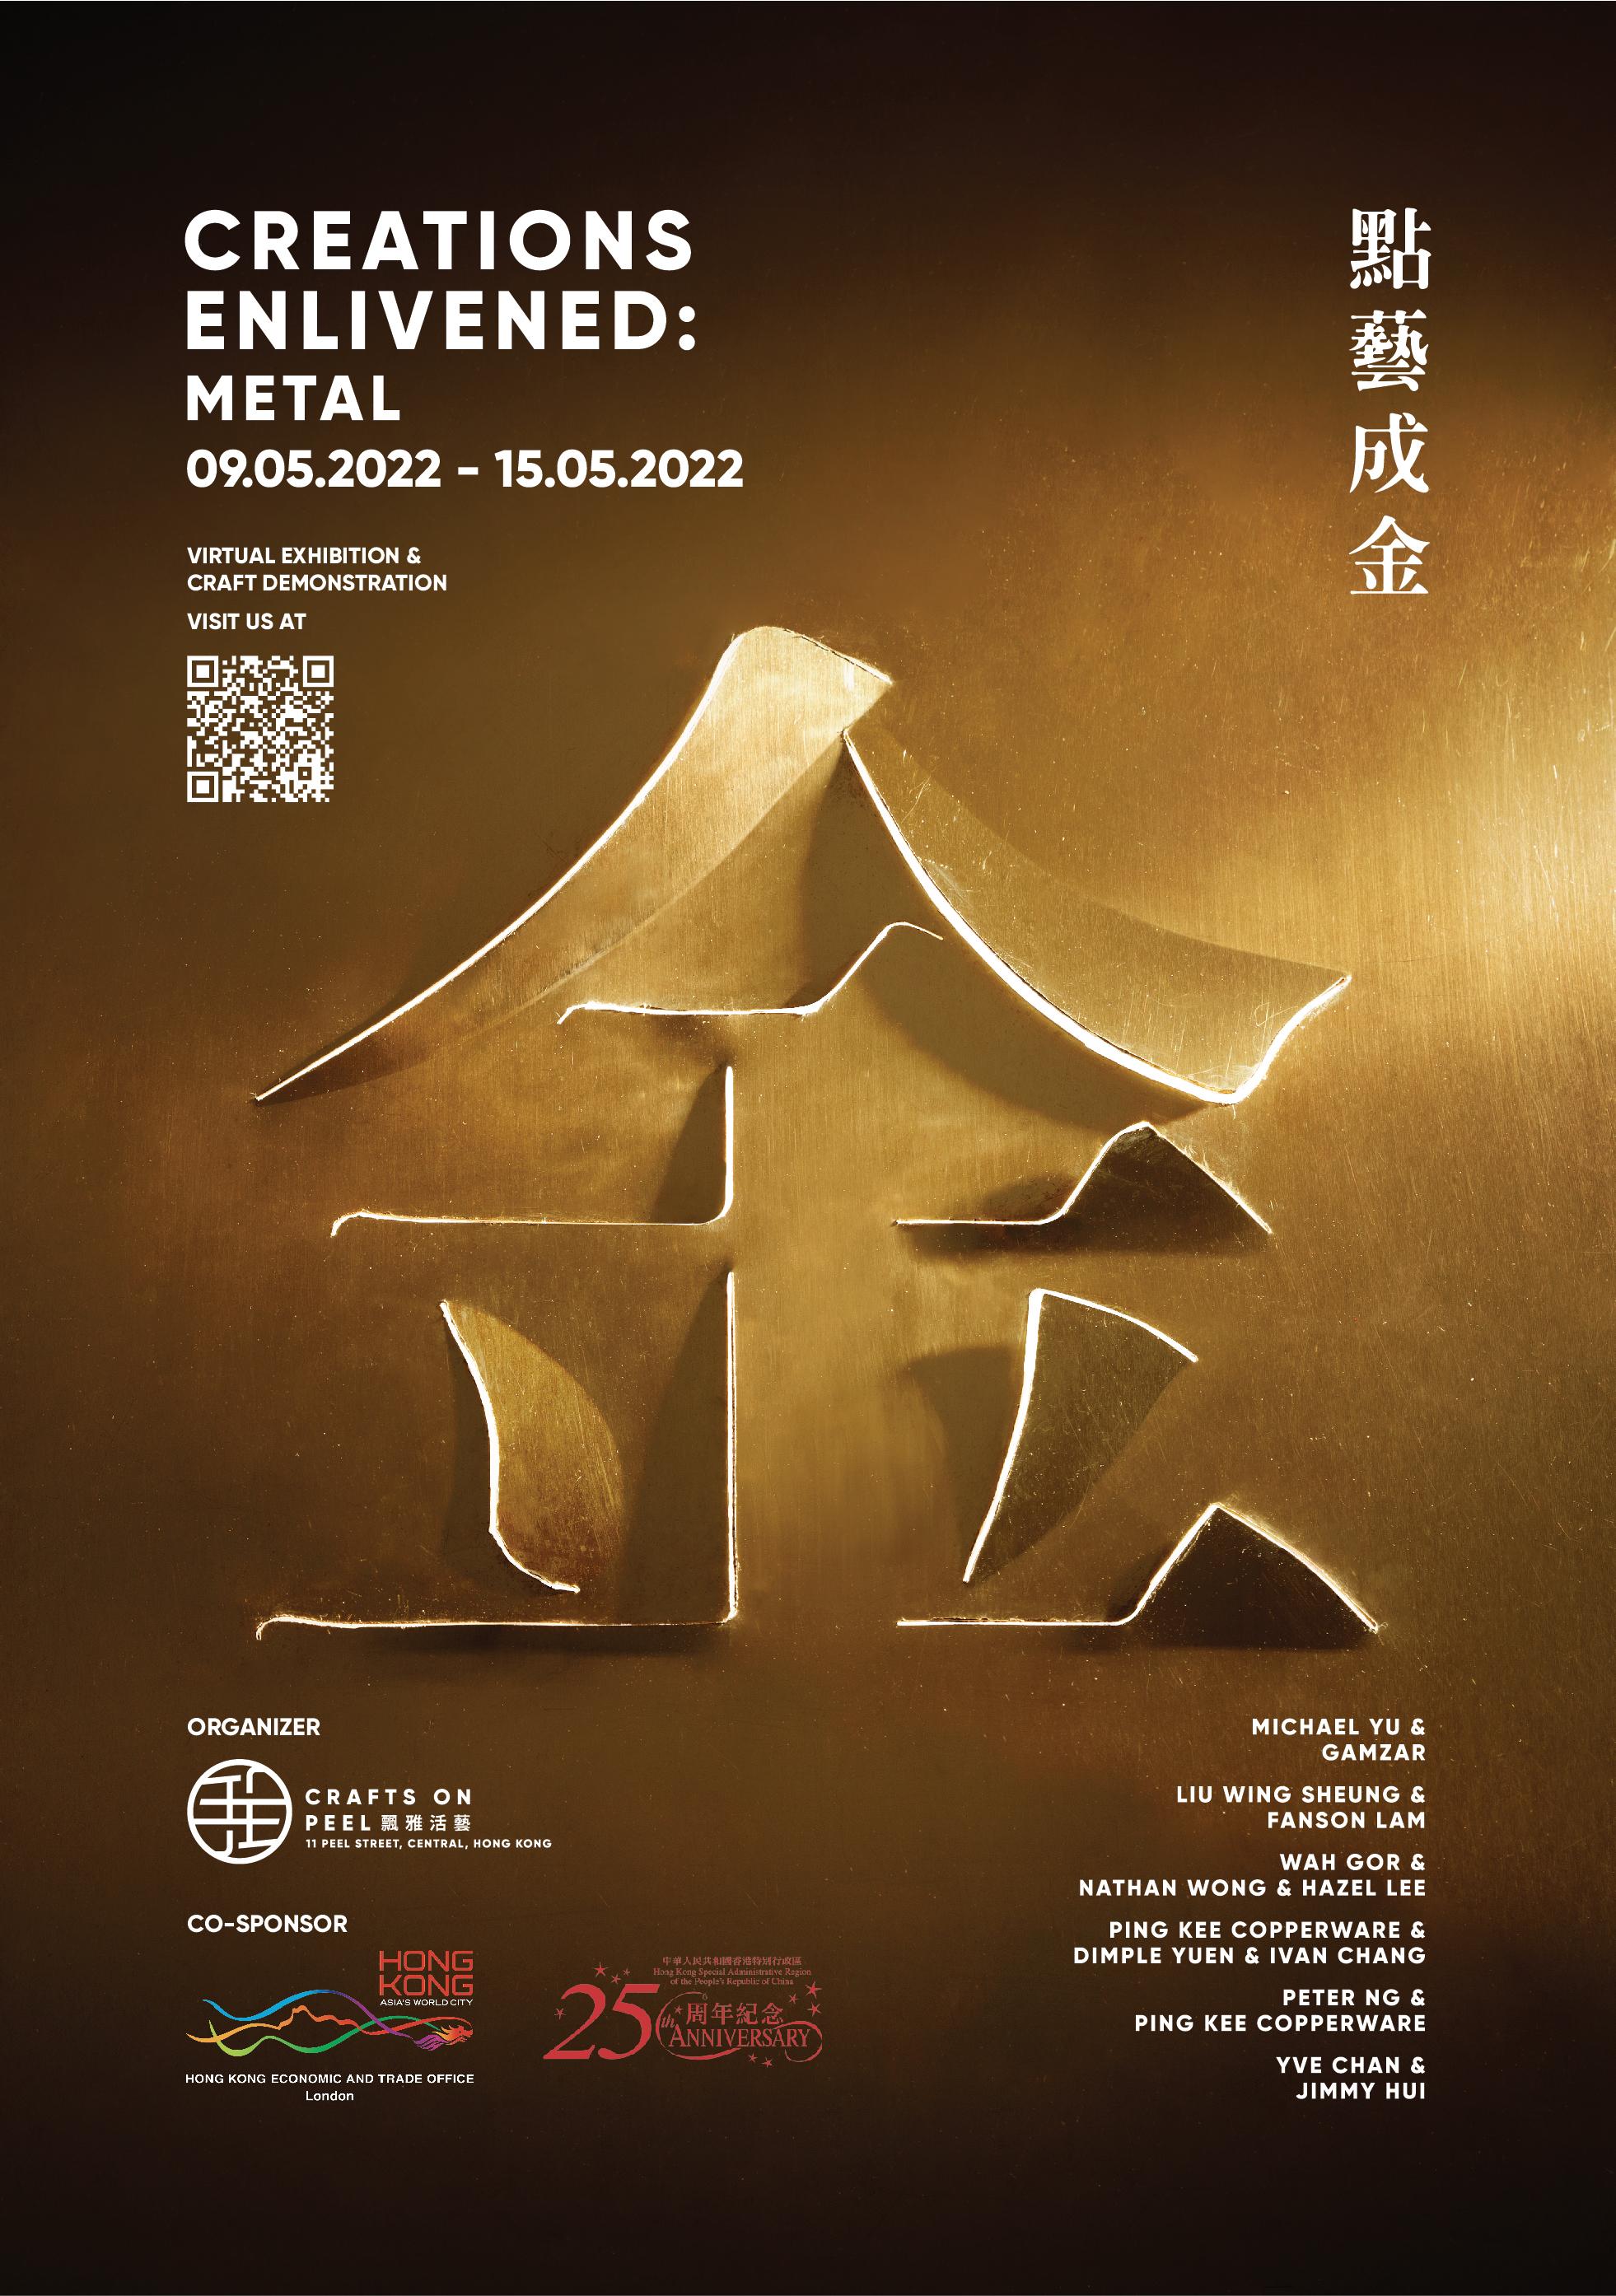 The Hong Kong Economic and Trade Office, London, supports Crafts on Peel, a charitable organisation, to join the London Craft Week 2022, bringing the virtual showcase “Creations Enlivened: Metal” to craft lovers in the United Kingdom and beyond. The event also commemorates the 25th anniversary of the establishment of the Hong Kong Special Administrative Region.